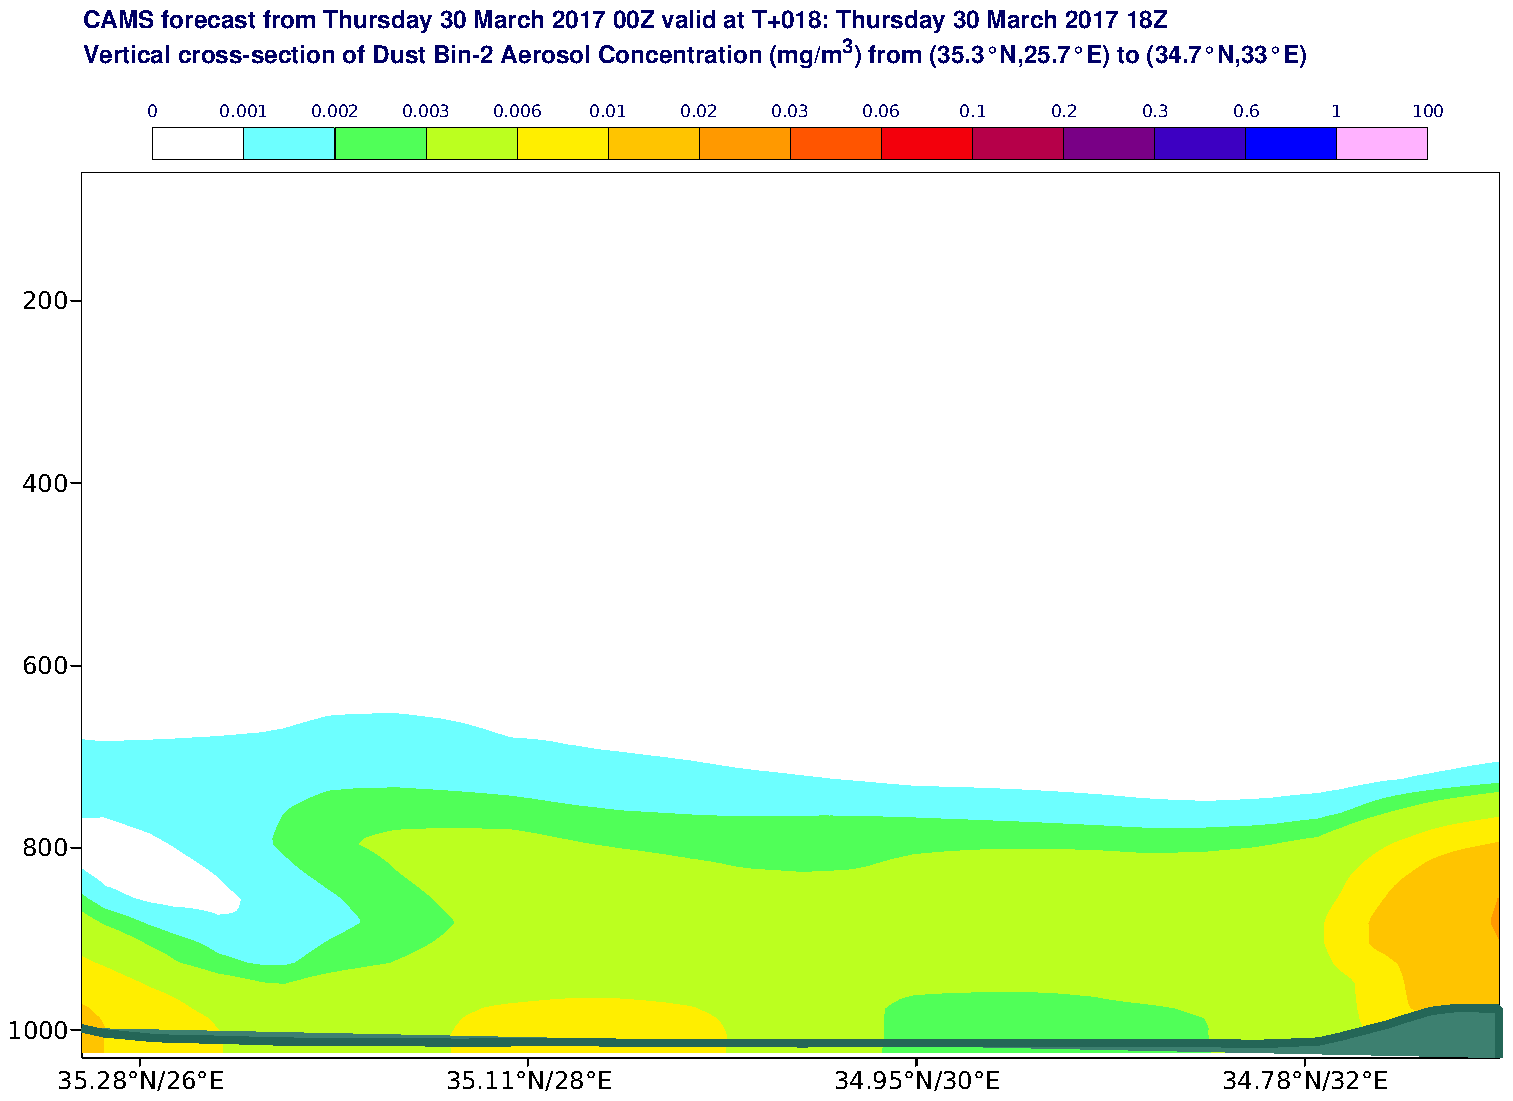 Vertical cross-section of Dust Bin-2 Aerosol Concentration (mg/m3) valid at T18 - 2017-03-30 18:00